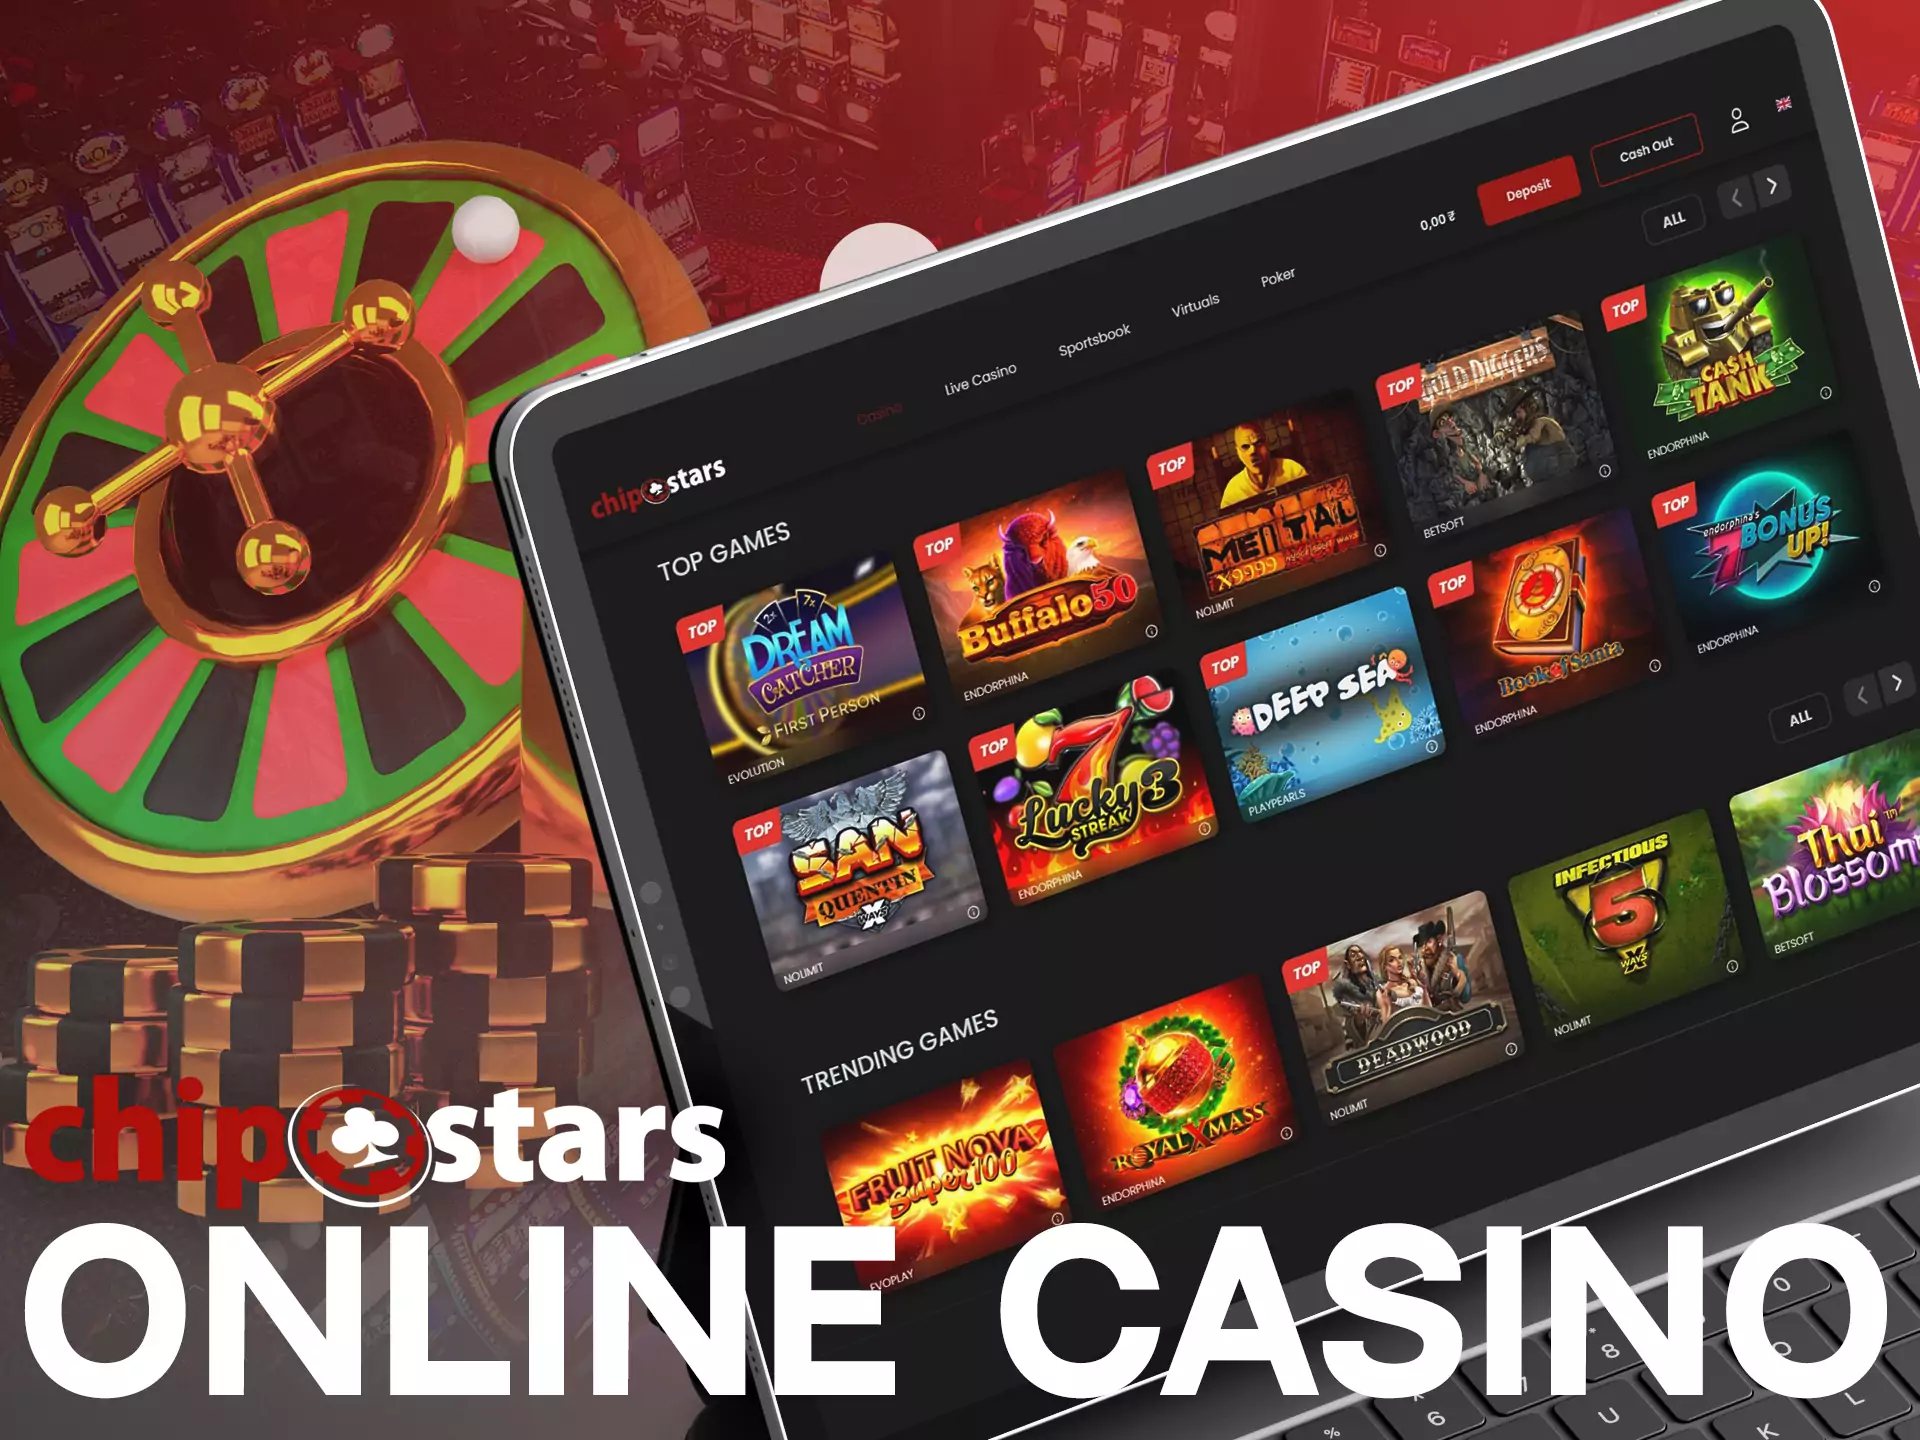 Besides betting, there is a range of fortune games in the Chipstars Online Casino.